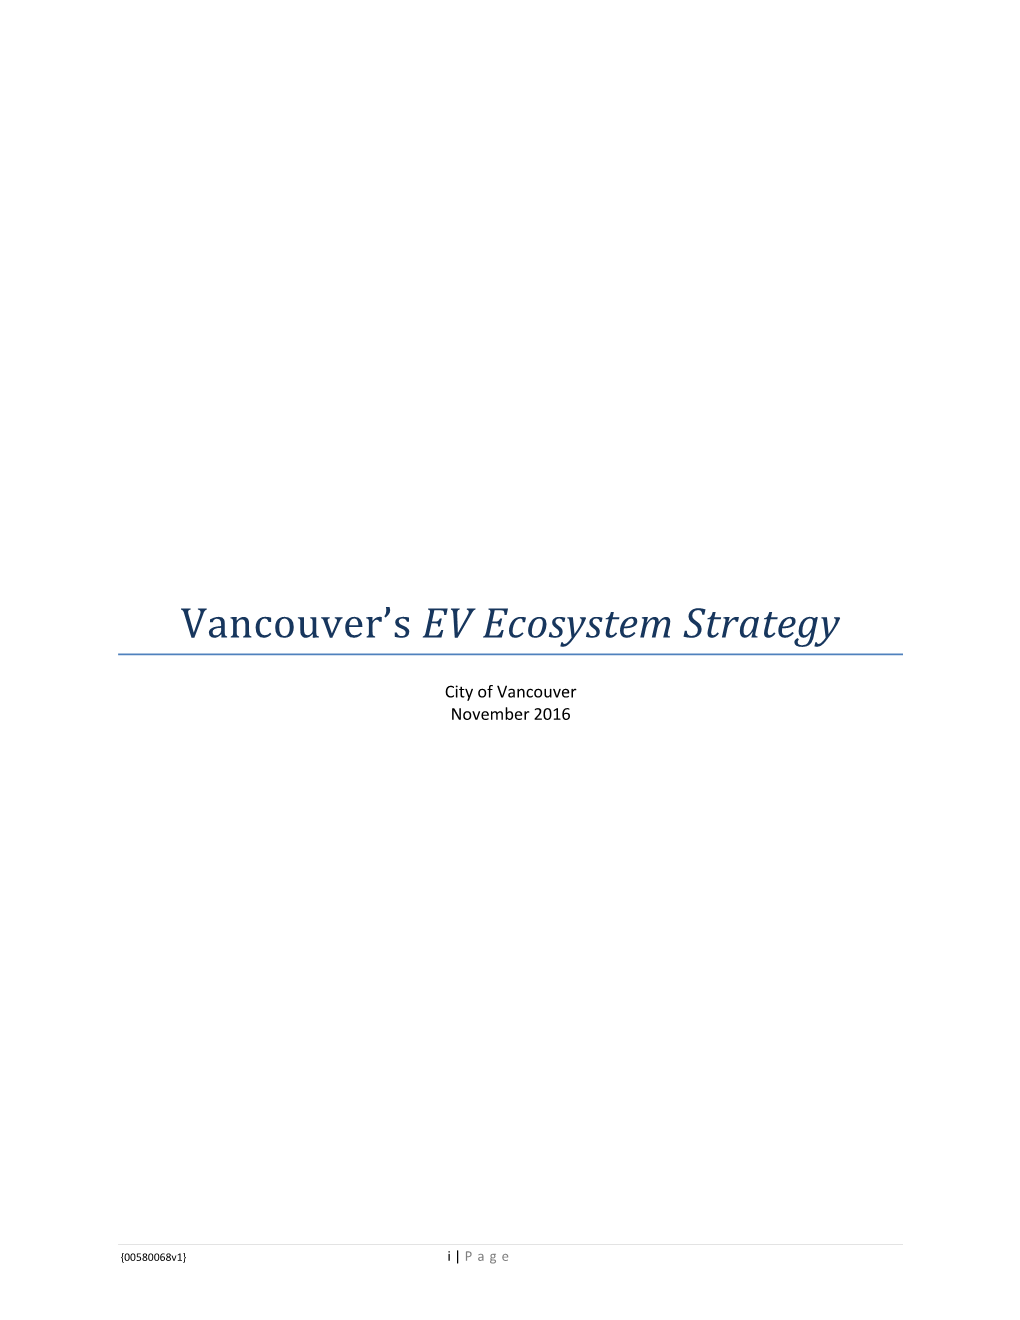 Electric Vehicles (Evs) Ecosystem Strategy